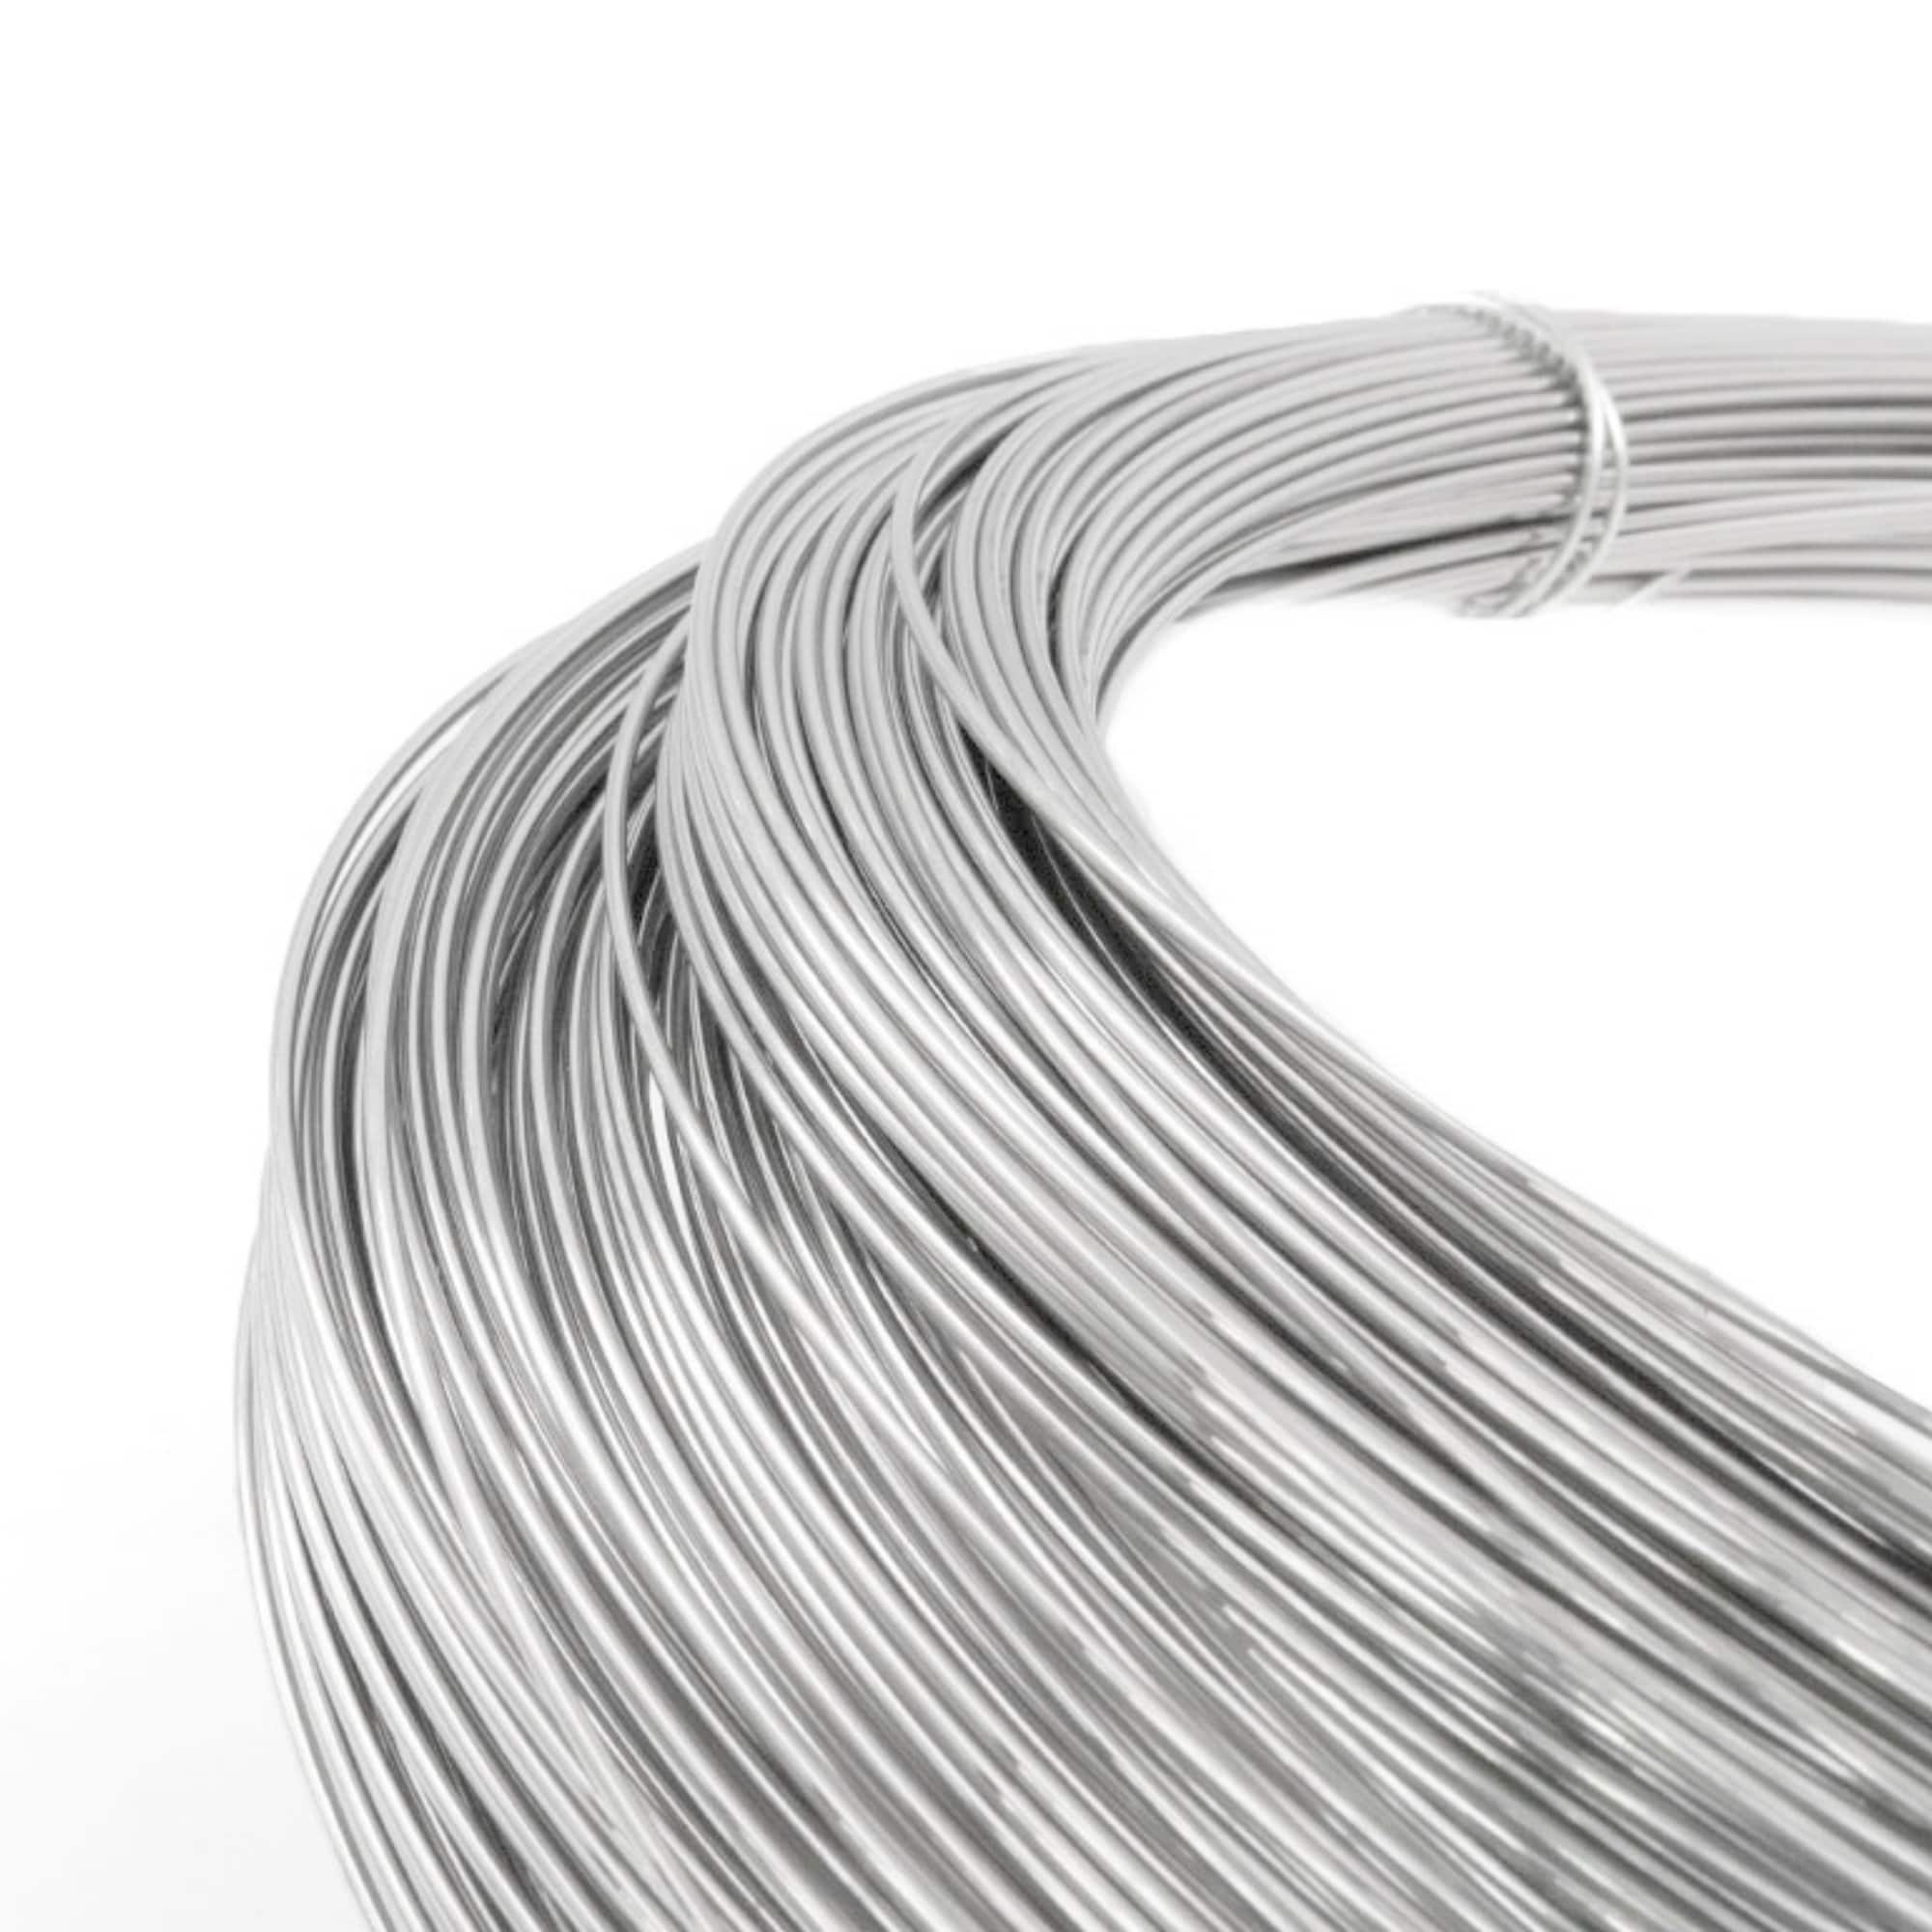  cridoz 26 Gauge Stainless Steel Wire for Jewelry